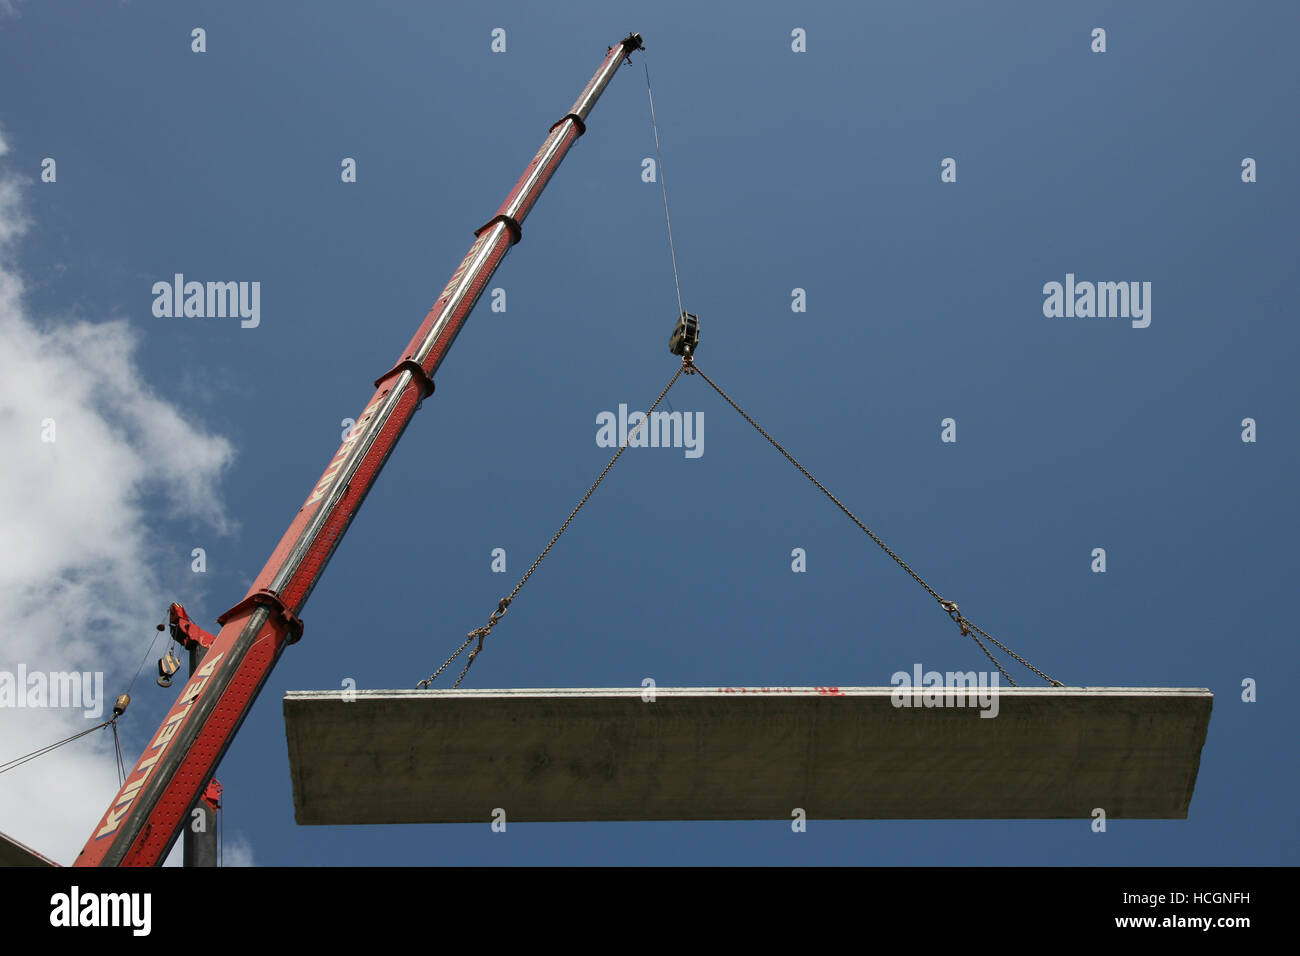 Precast concrete hollow floor slab / plank suspended from a mobile crane. Stock Photo